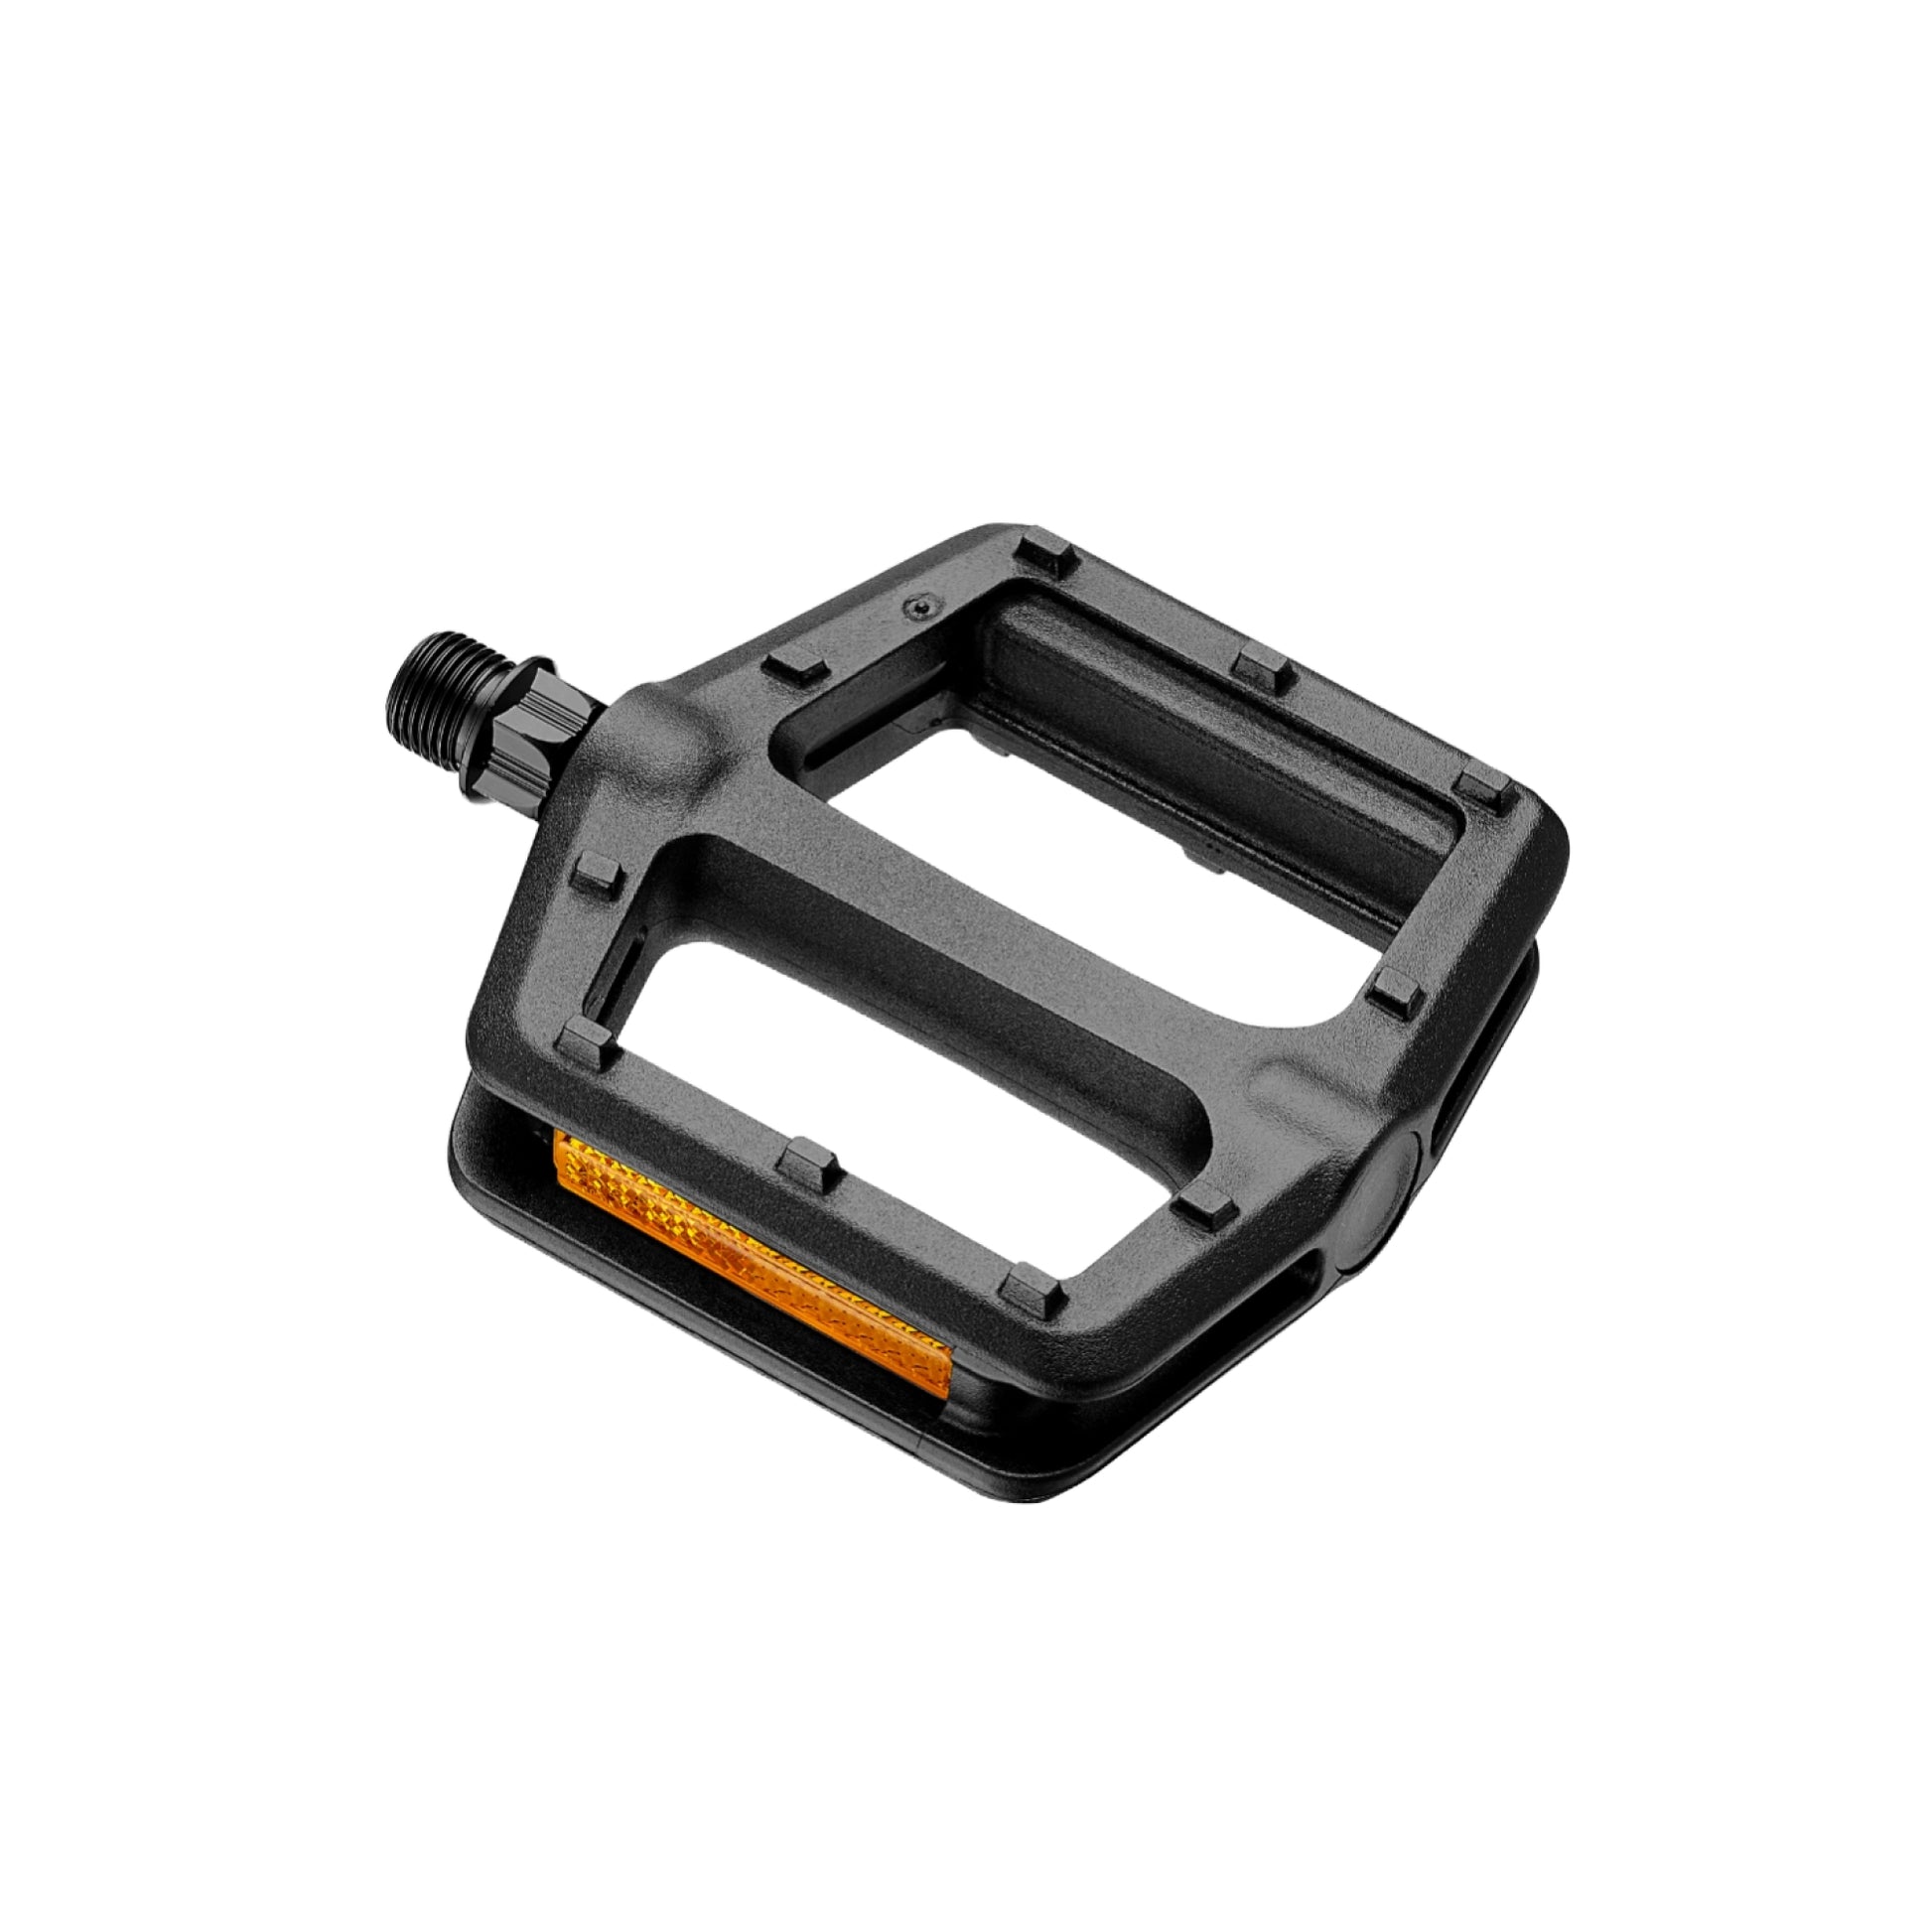 VPE-536 NYLON PLATFORM PEDALS premium bicycle accessories by omobikes pedal side view